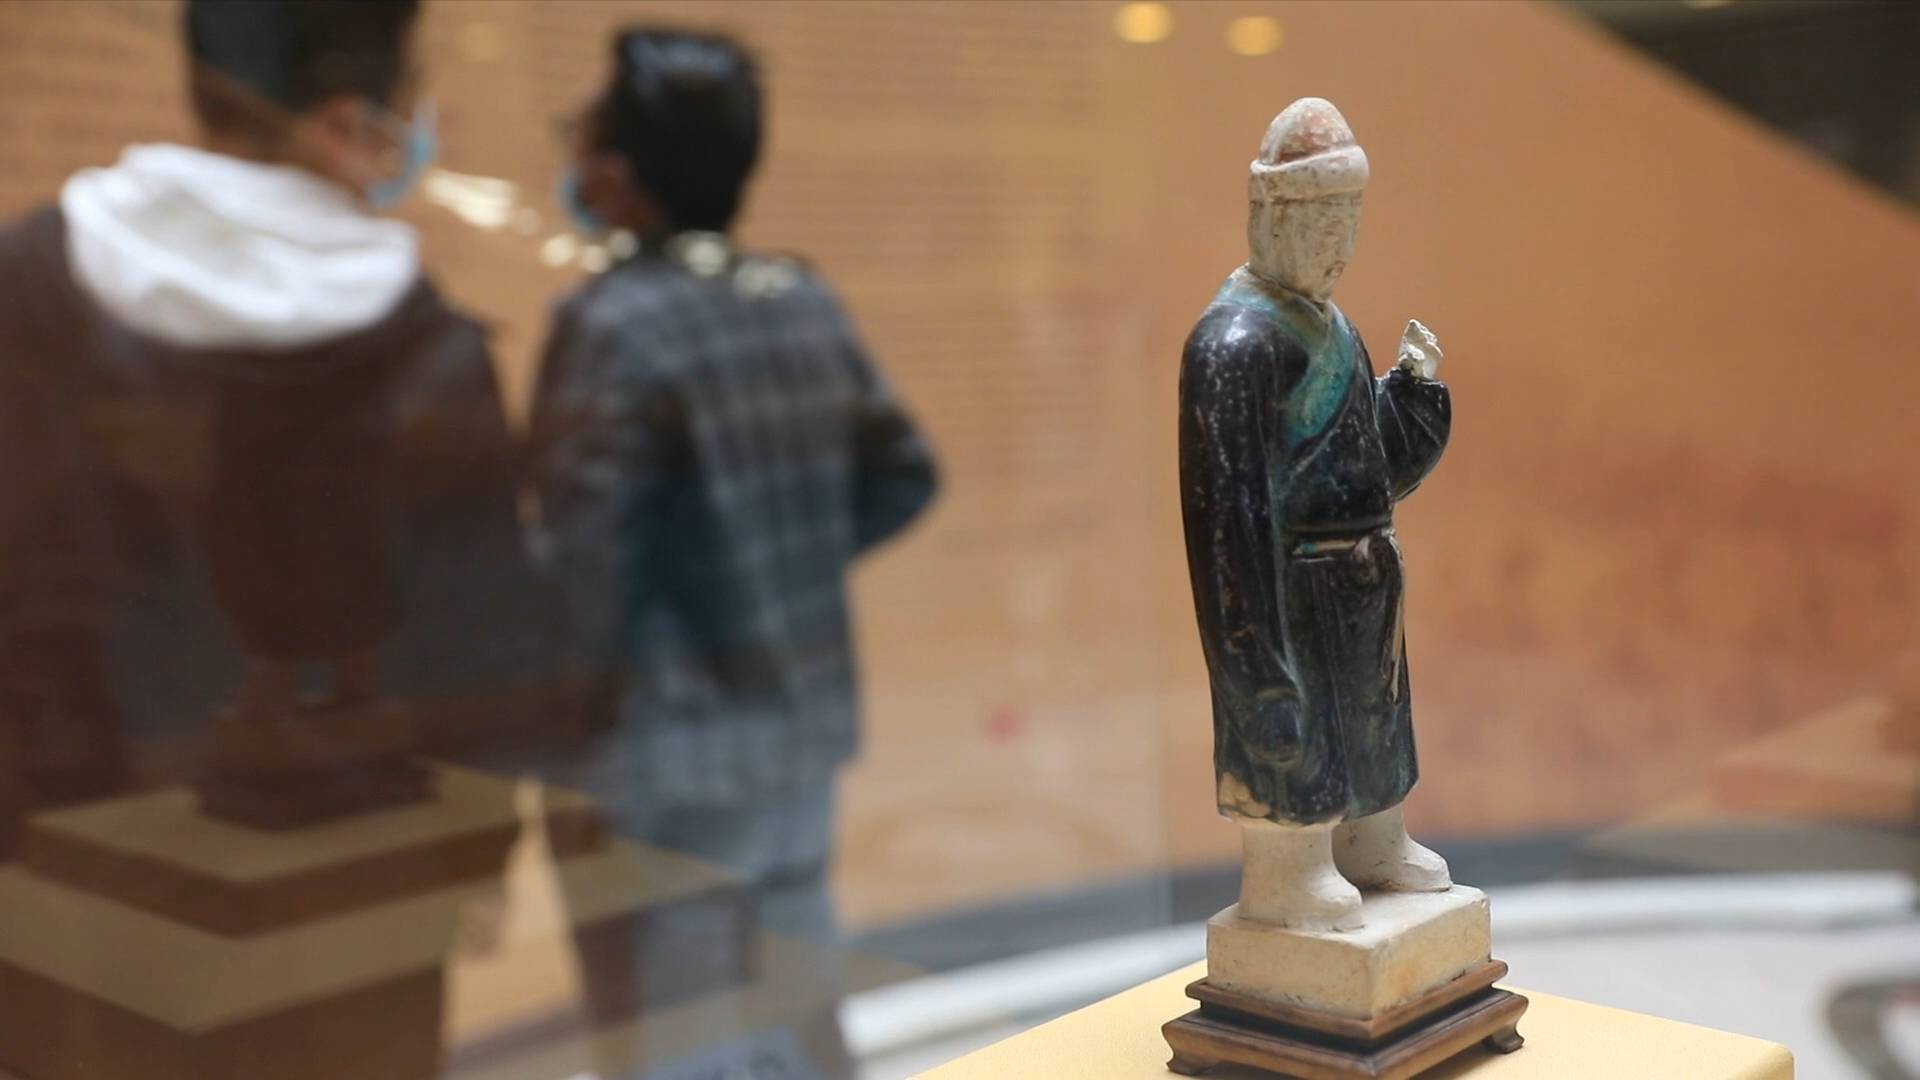 GLOBALink | Ming Dynasty pottery figurines returned to China